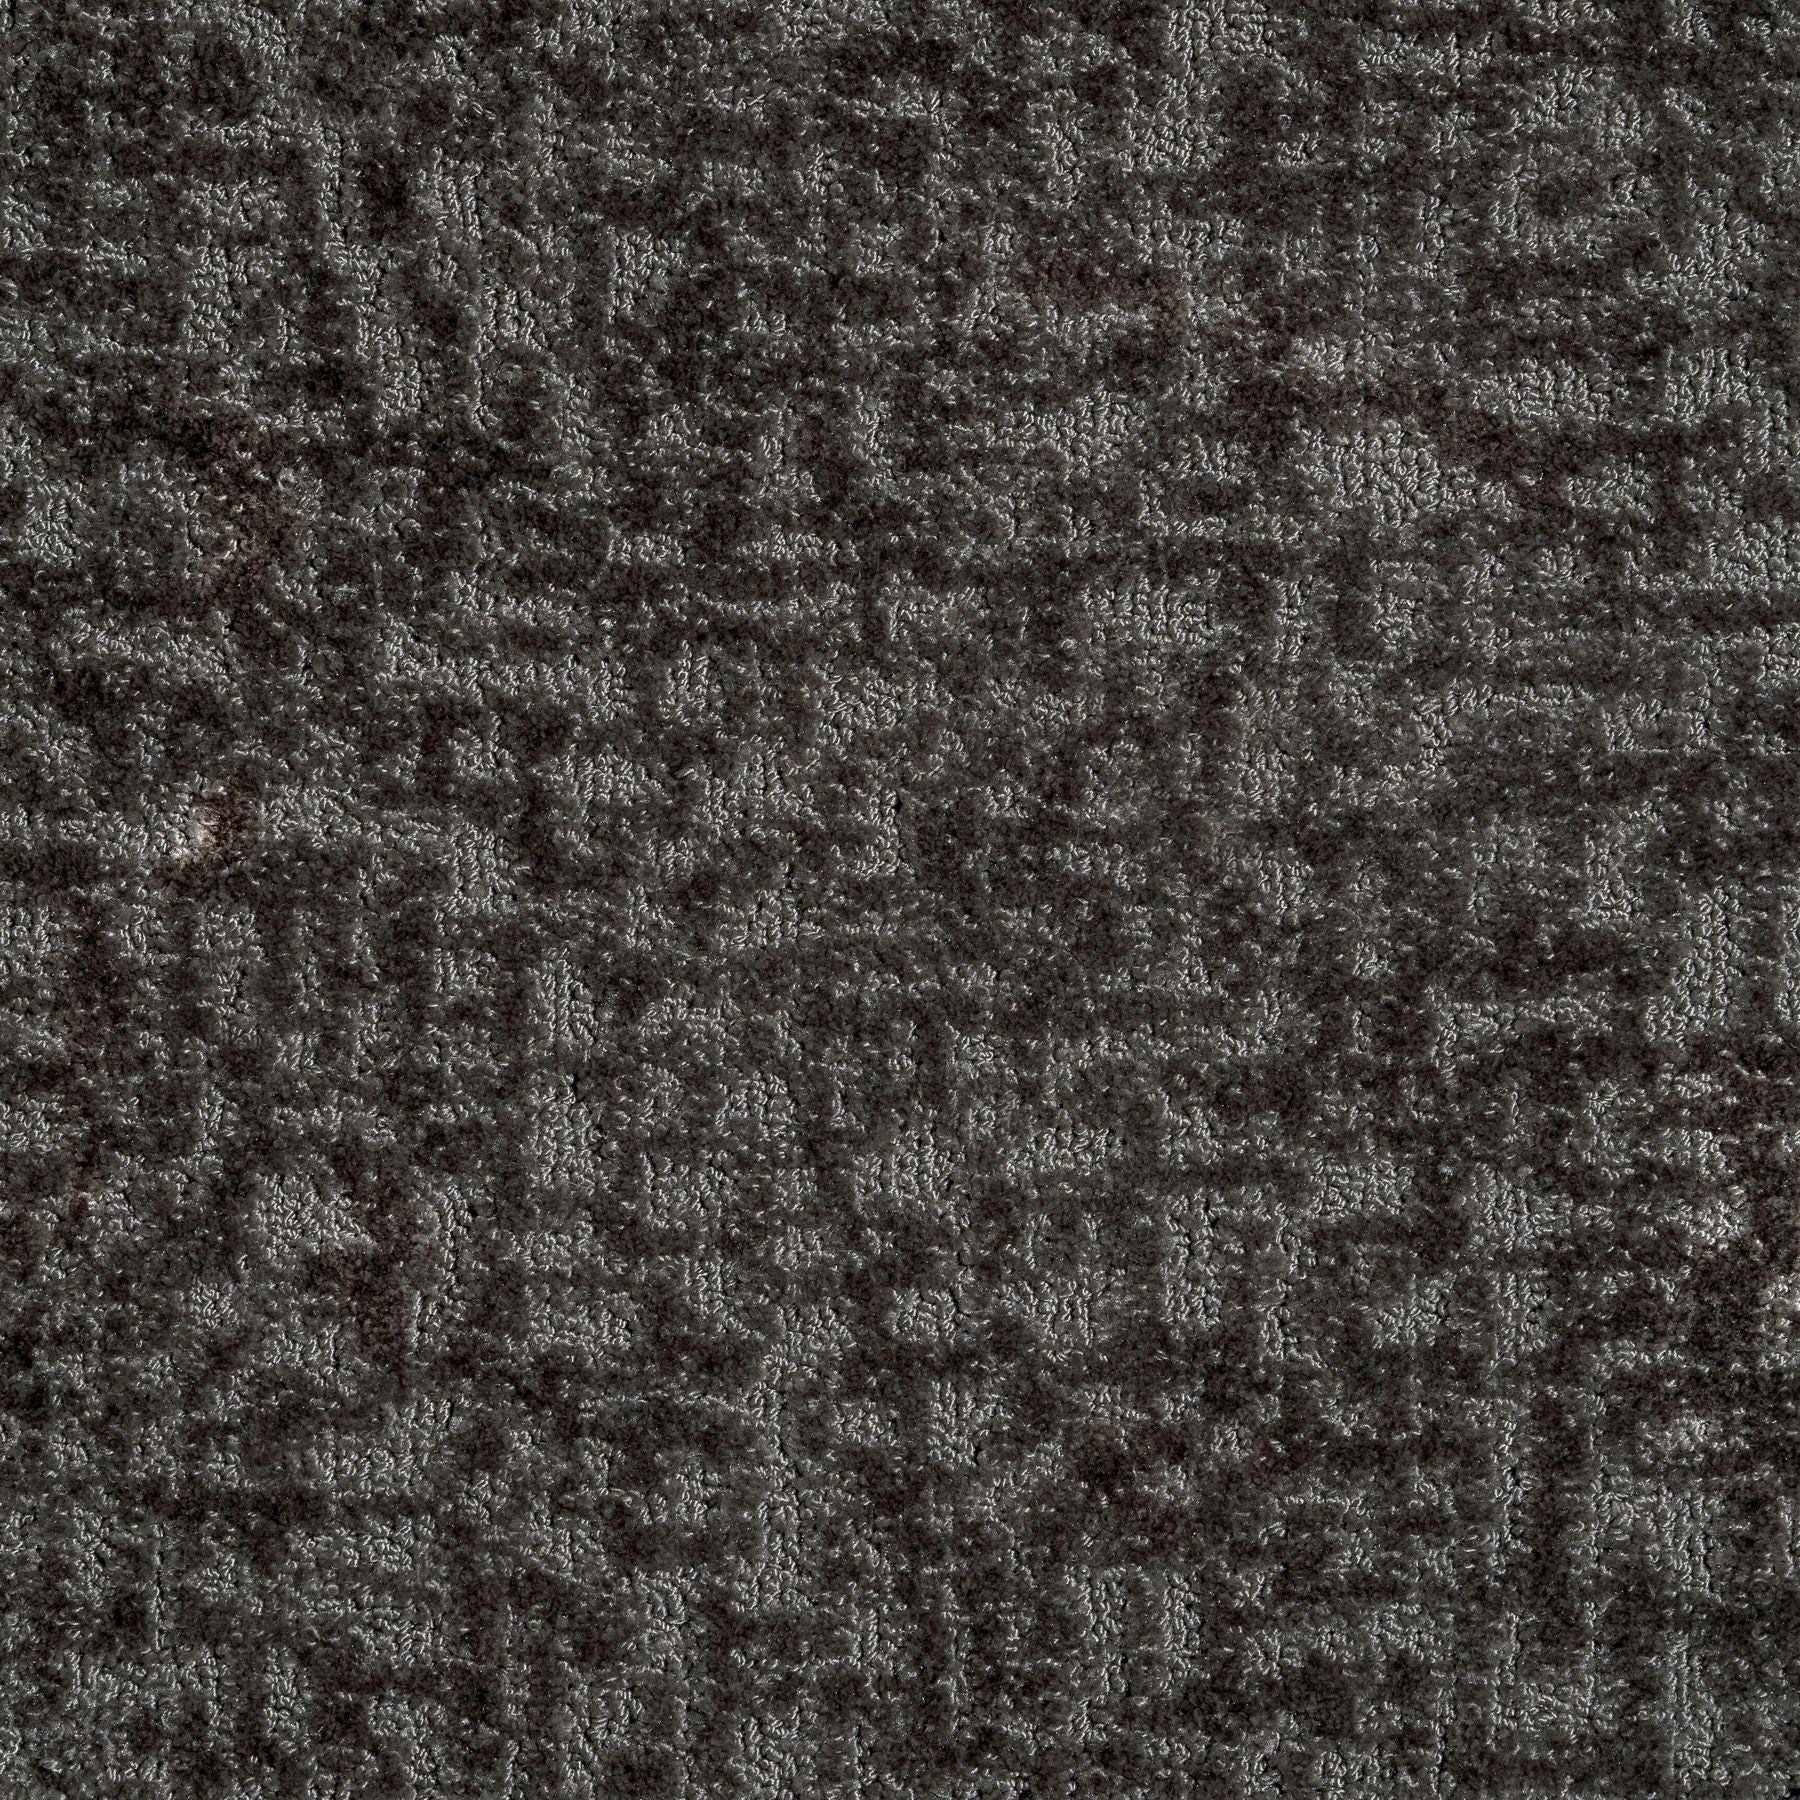 Synthetic-blend broadloom carpet swatch in an abstract textured loop weave in charcoal.